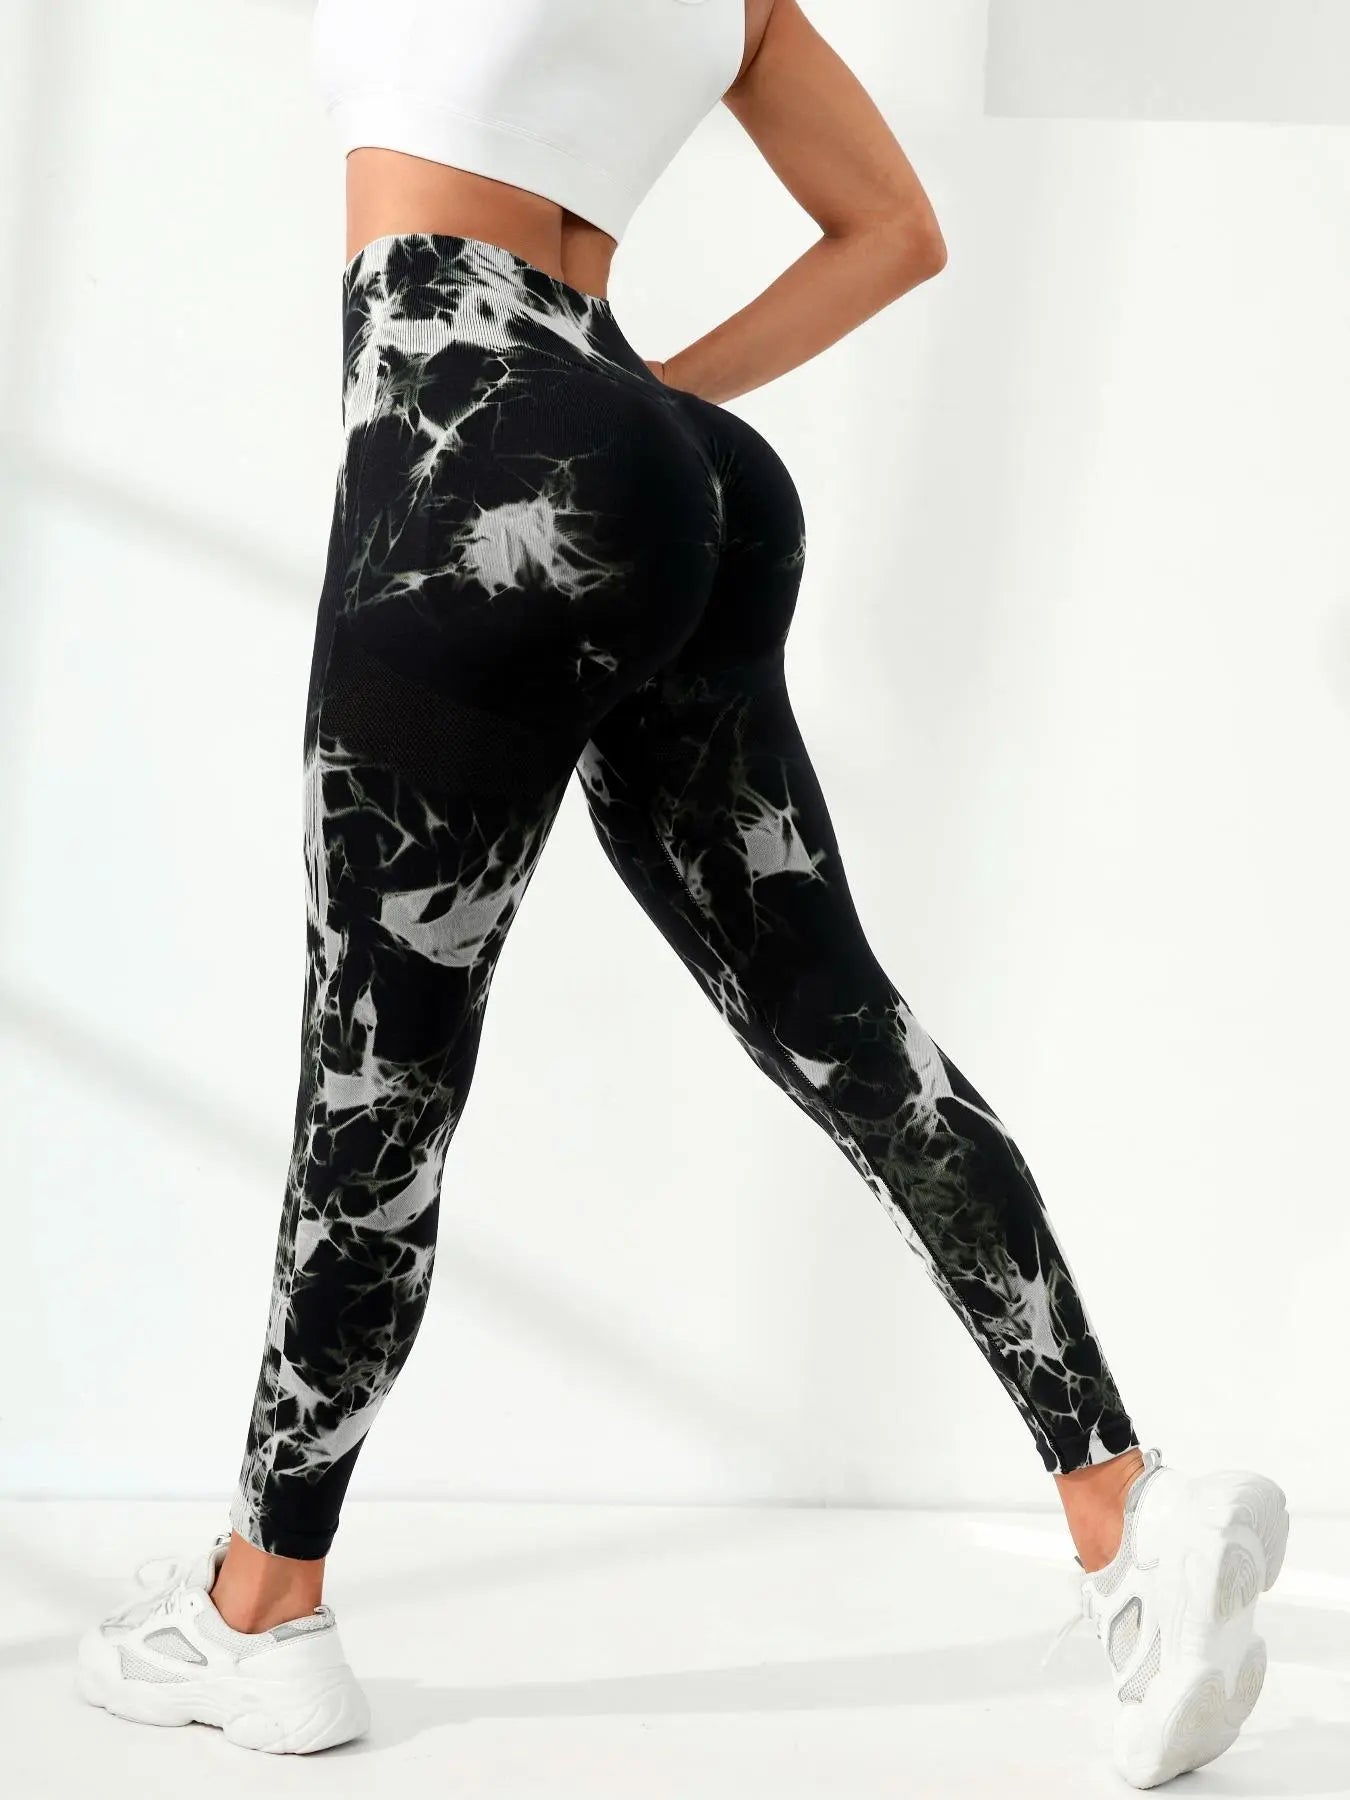 Women'S Tie Dye Print High Waist Sports Leggings for Summer Spring Fall, Casual Sporty Comfy Breathable Seamless Skinny Pants for Yoga Gym Workout Running, Women Sport & Outdoor Clothing